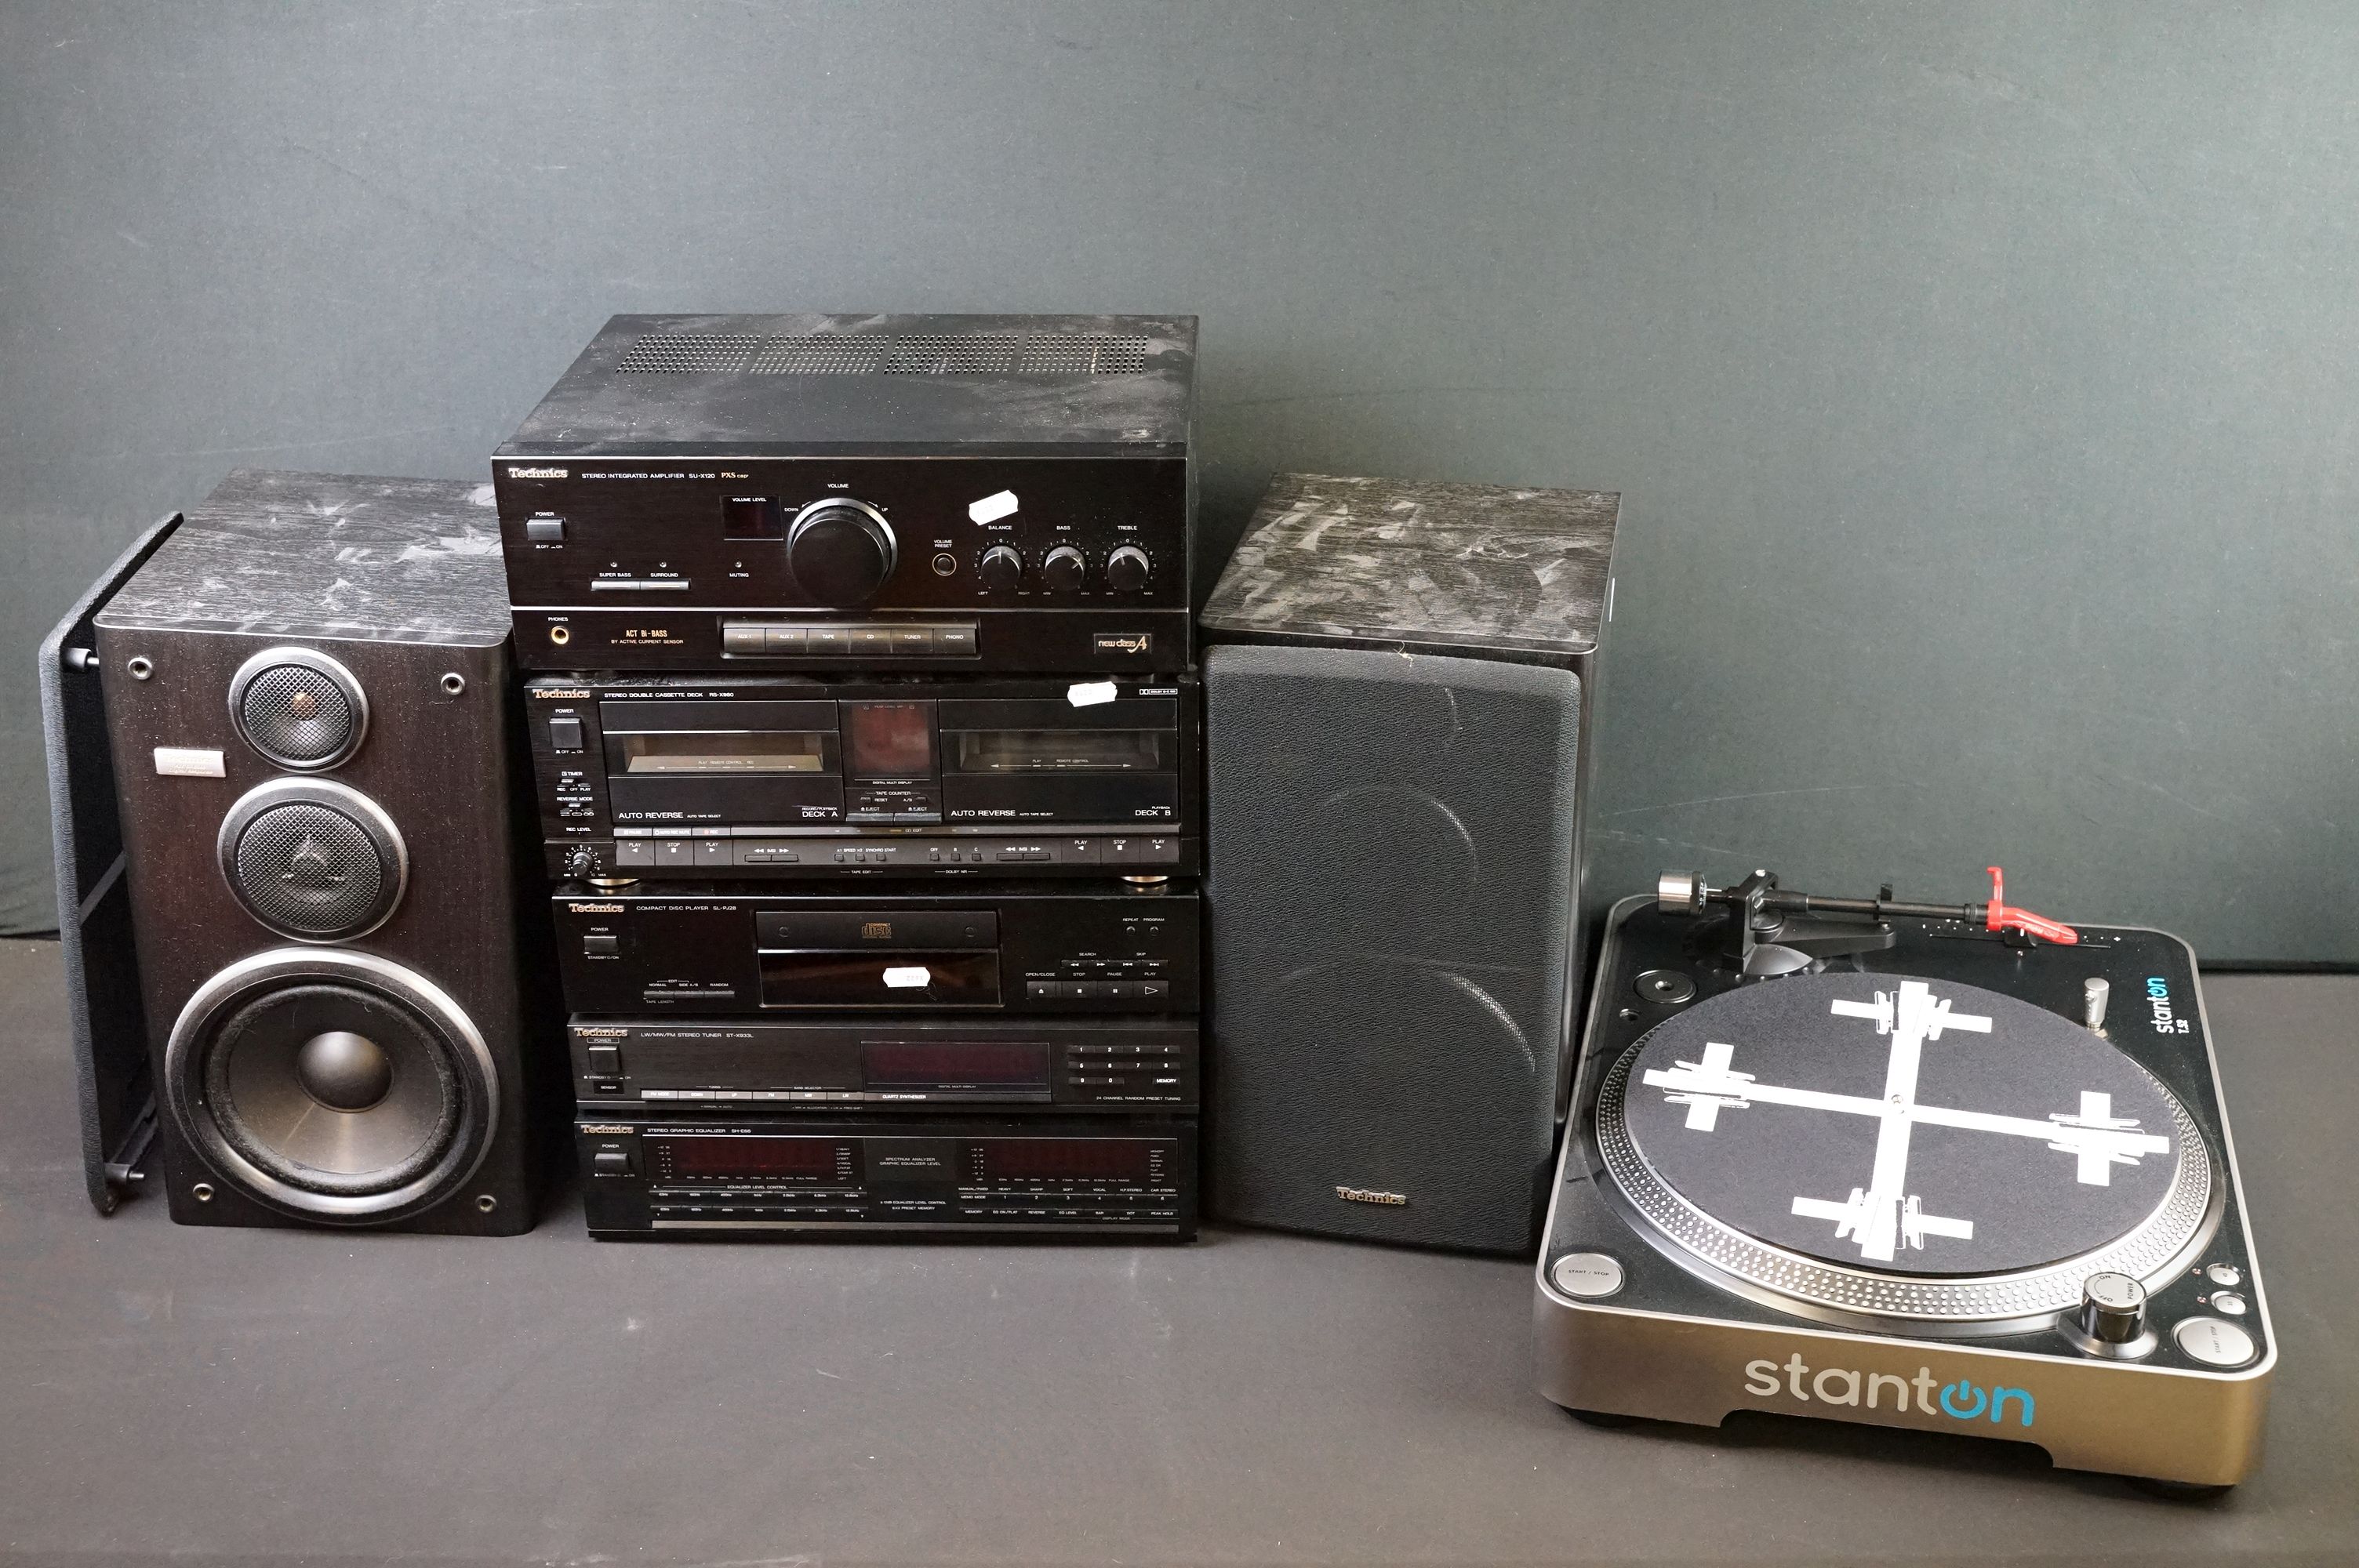 Stereo Equipment - Hi-fi separates to include Stanton turntable and Technics SU-X120 amplifier